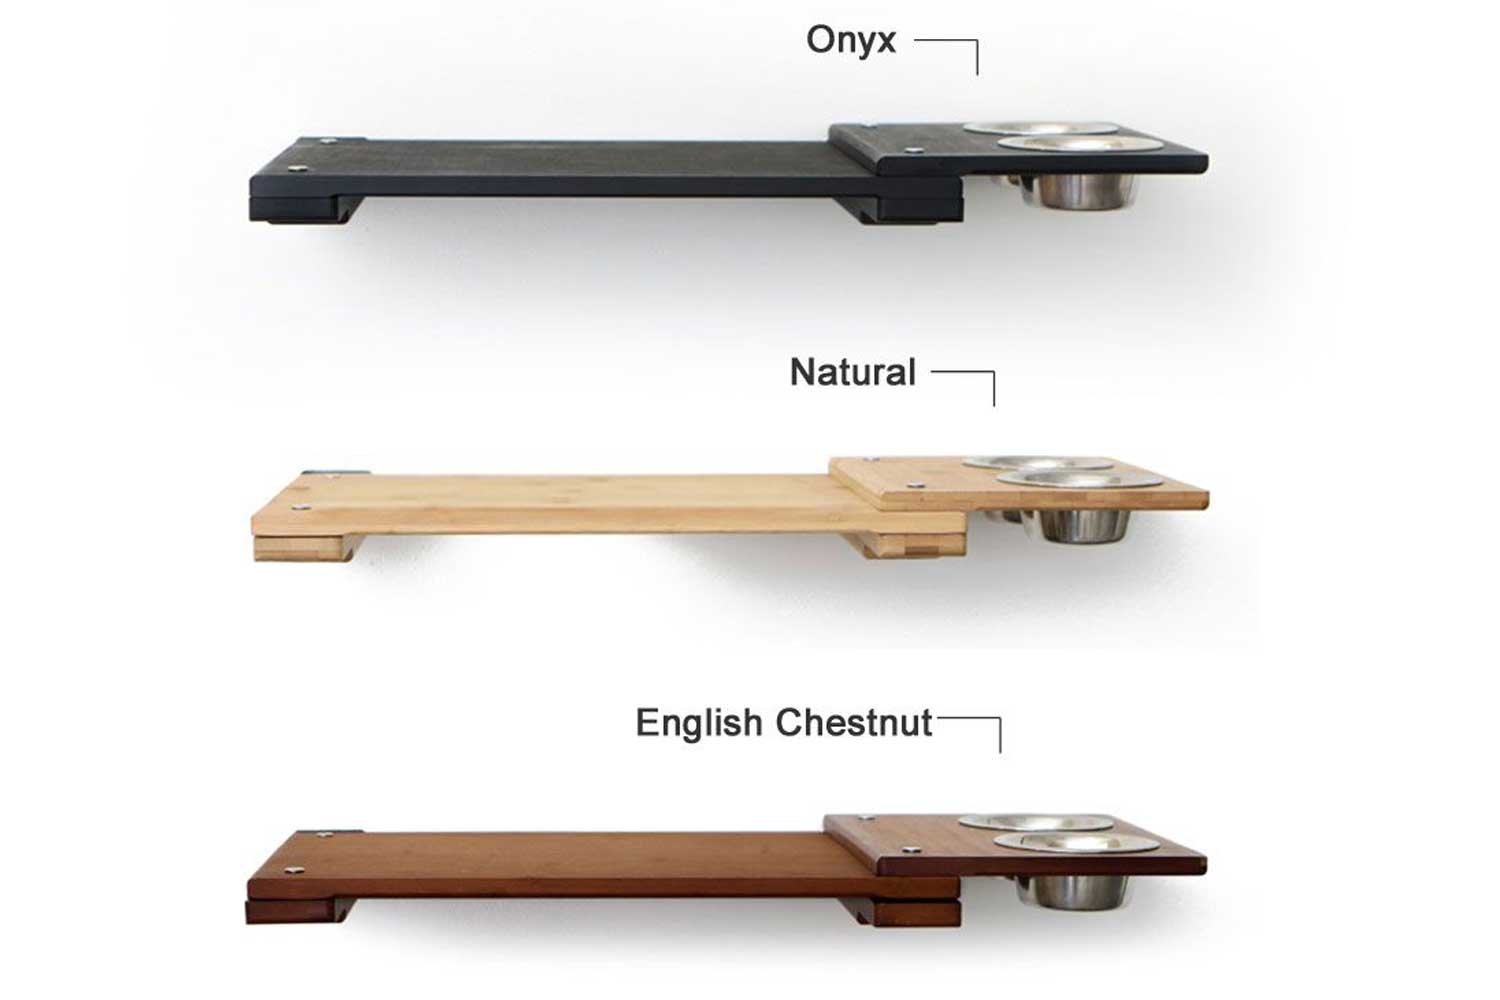 Color variations of the 25-Inch Shelf with Feeder Bowls